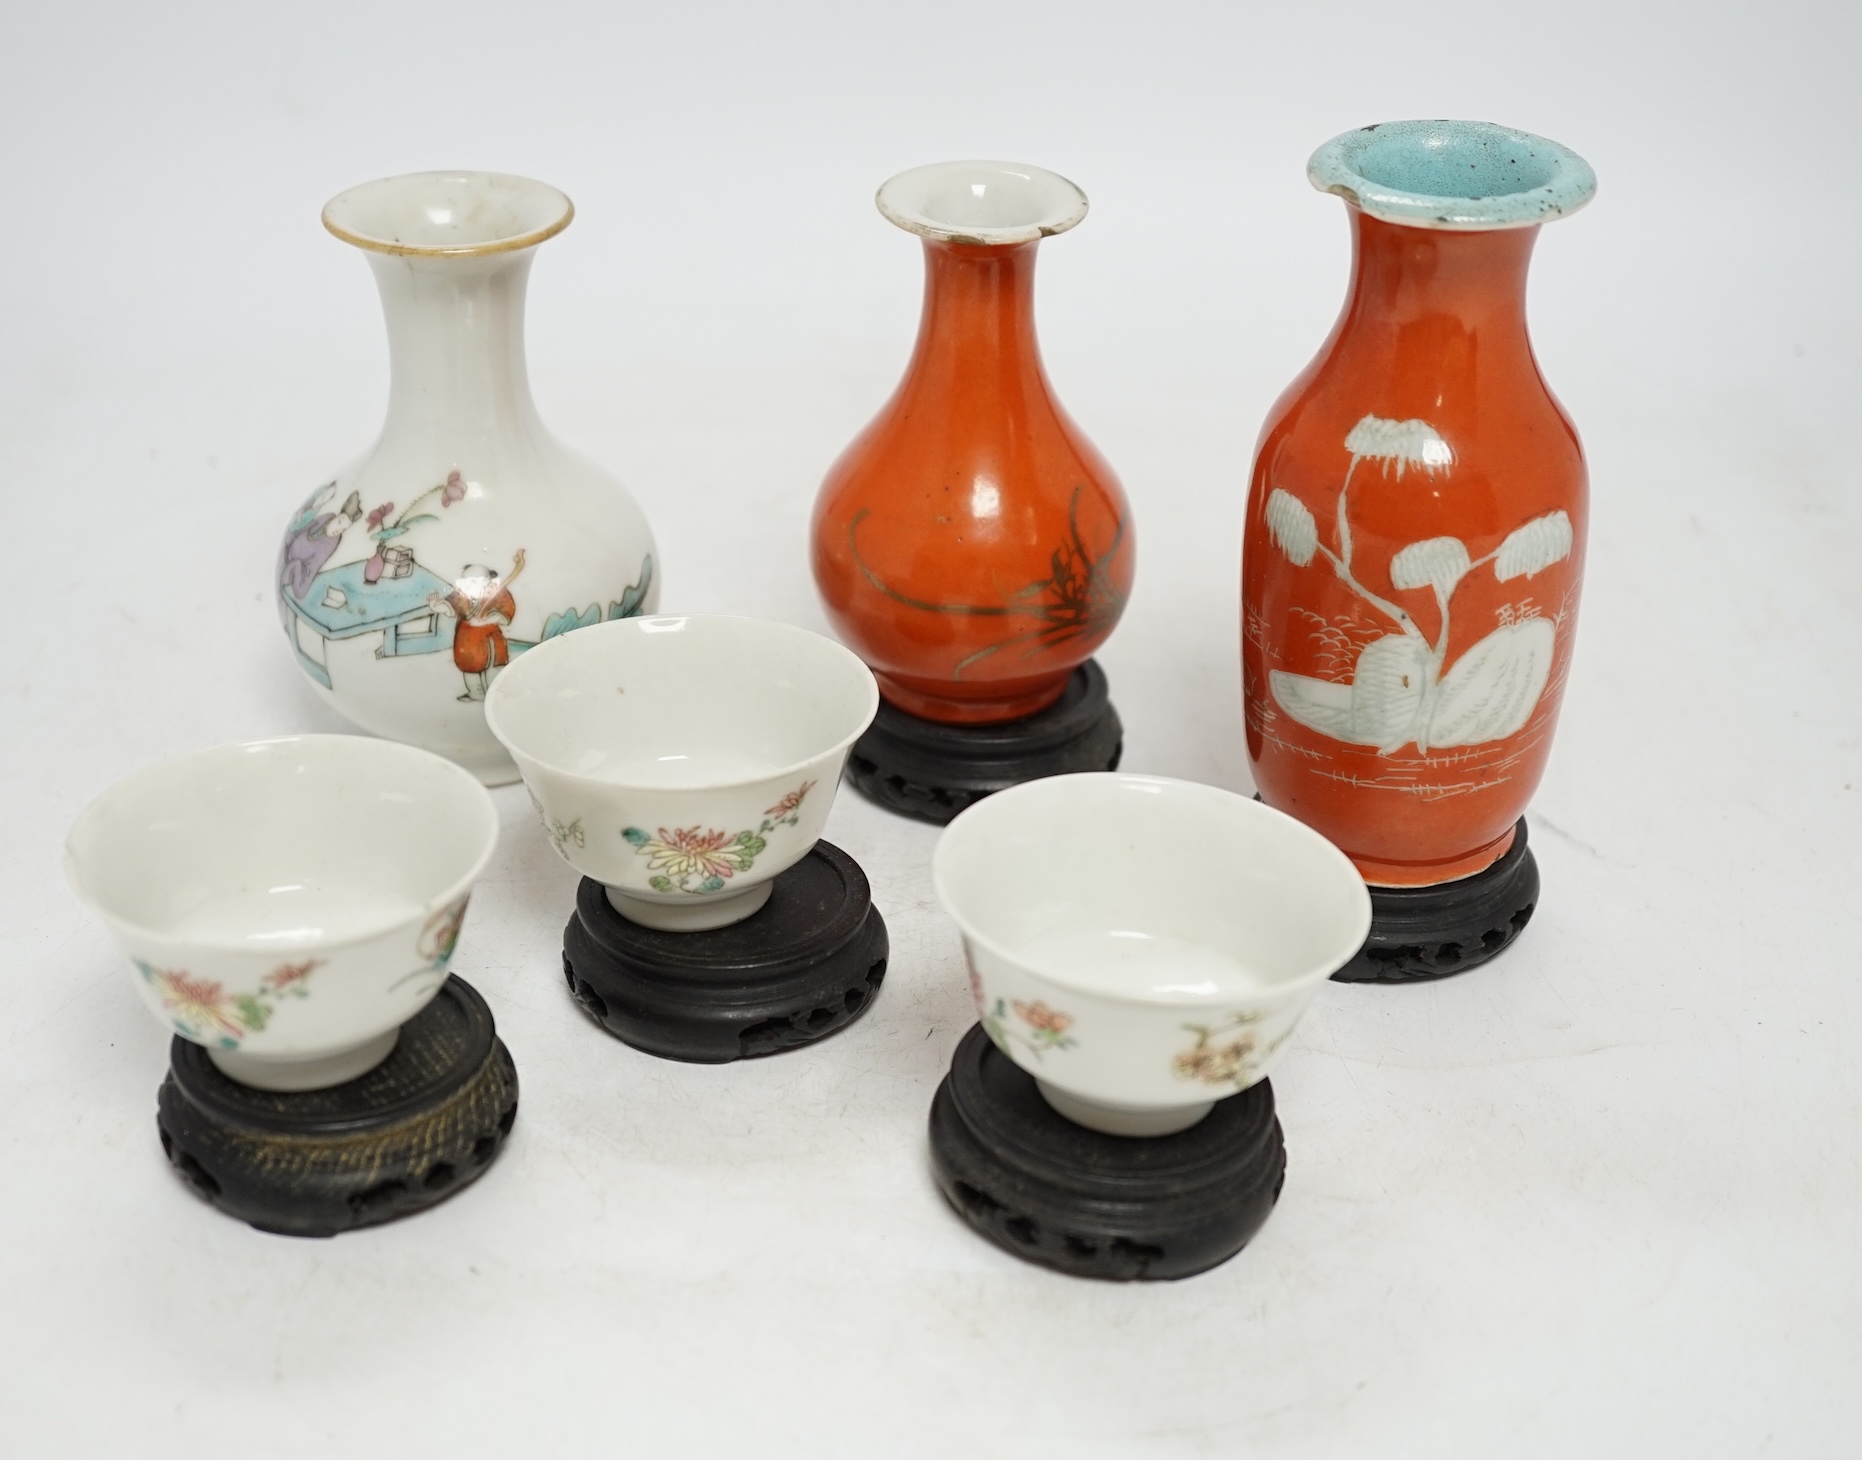 Six Chinese miniature porcelain vases and tea bowls, with wood stands, largest overall 15cm high. Condition - poor to fair